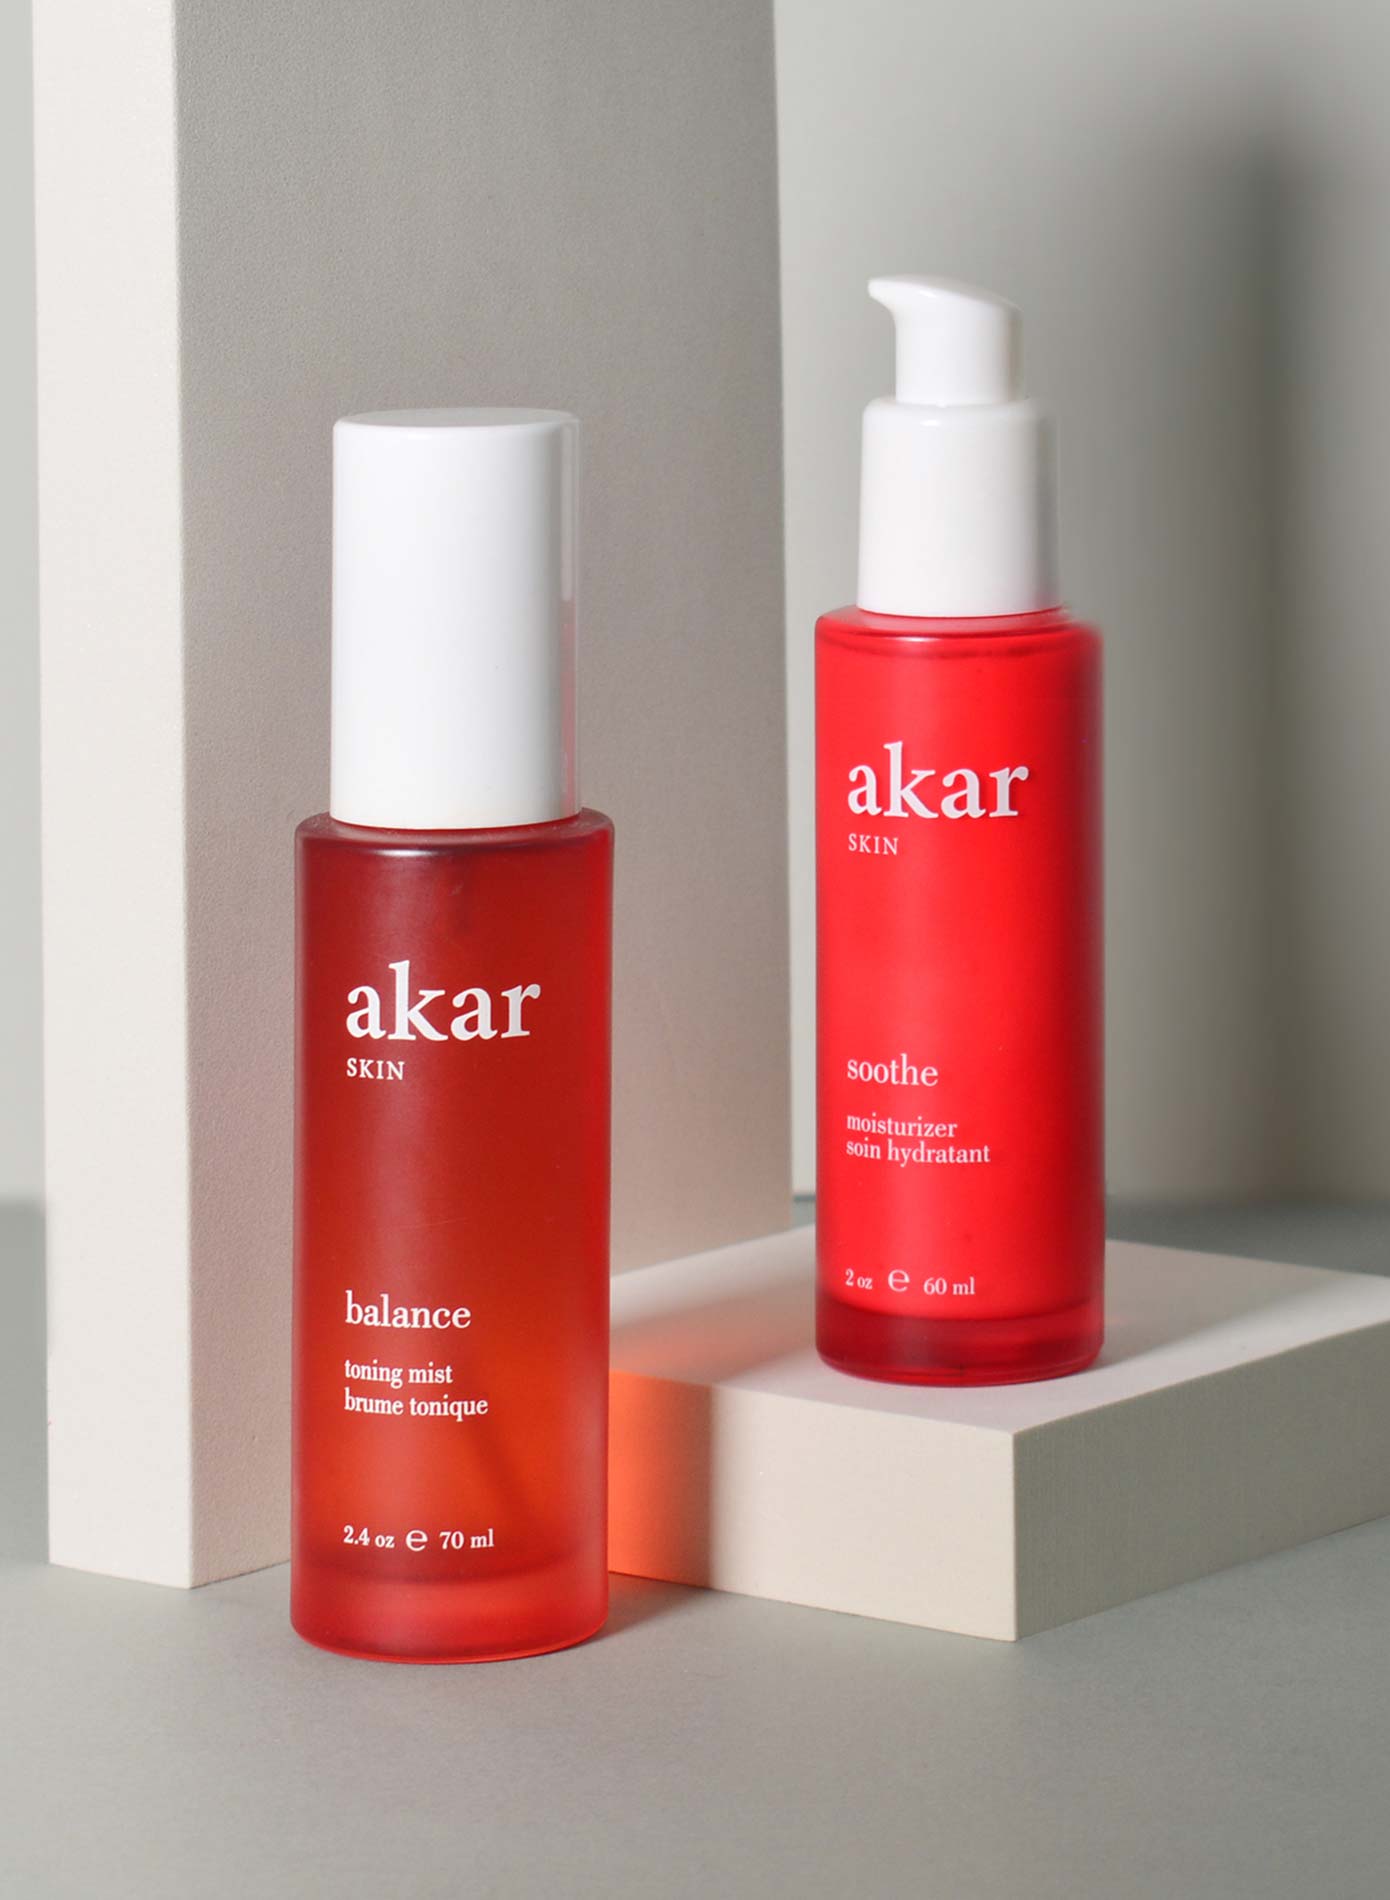 Akar Skin, Fresh Rose Duo, Valentines, skincare, beauty products, special, sale